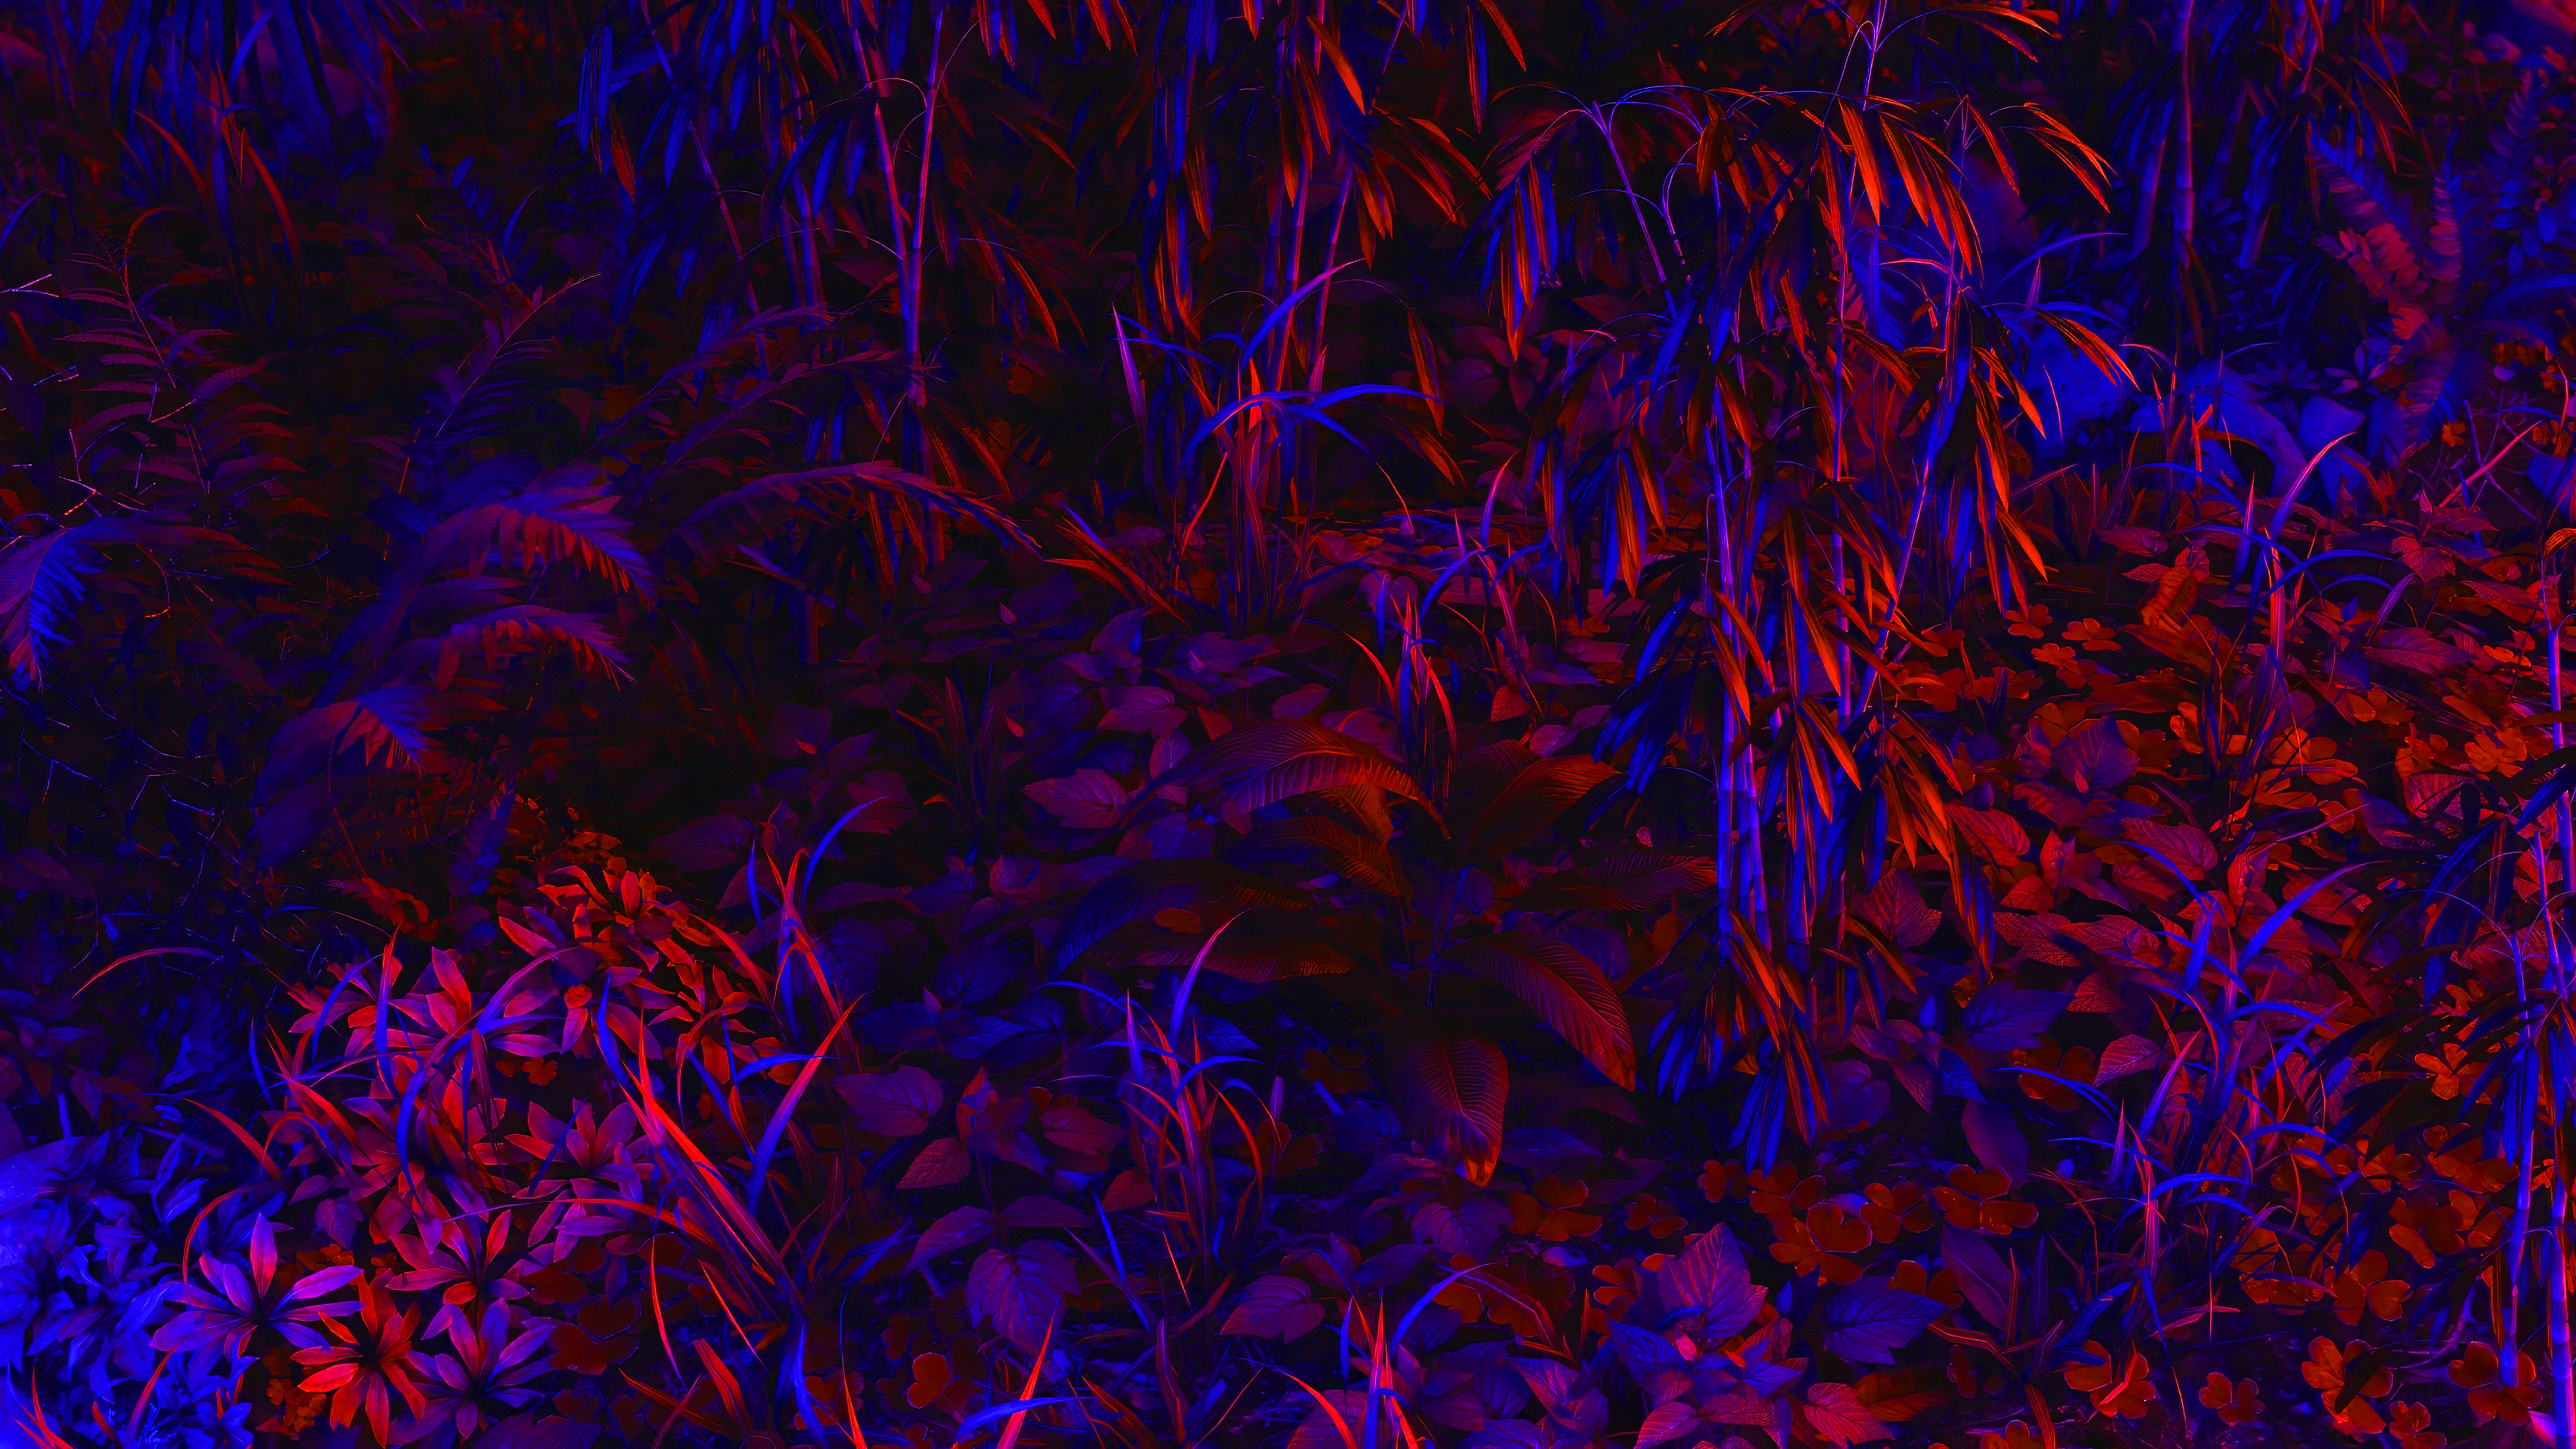 General 3840x2160 exotic plants ferns grass blue red neon bright